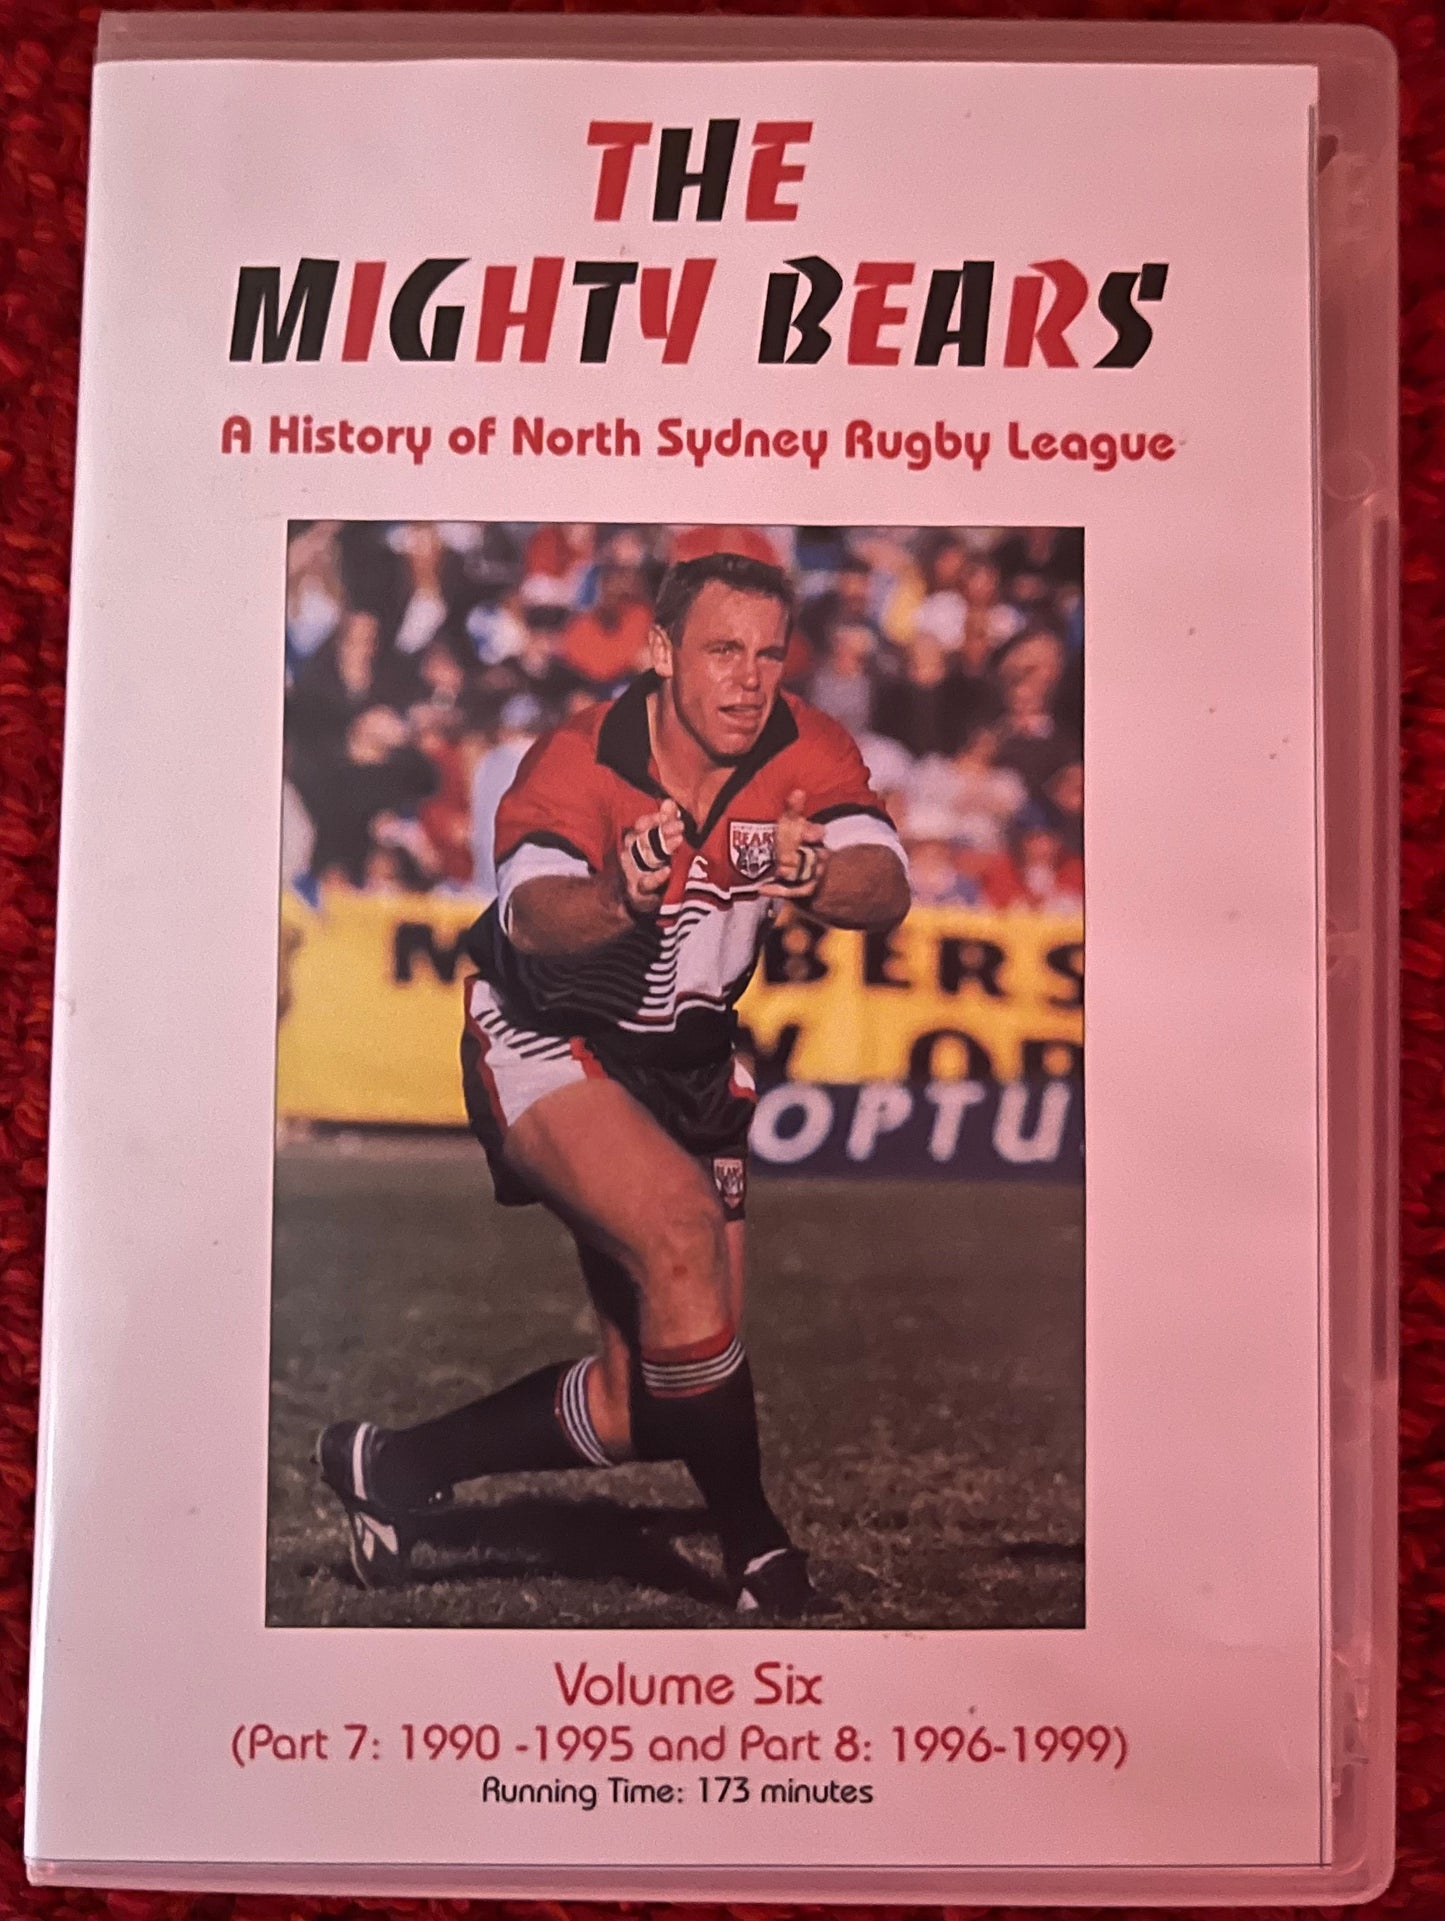 The Mighty Bears - Volume 6 (Part 7: 1990 - 1995 and Part 8: 1996 - 1999)